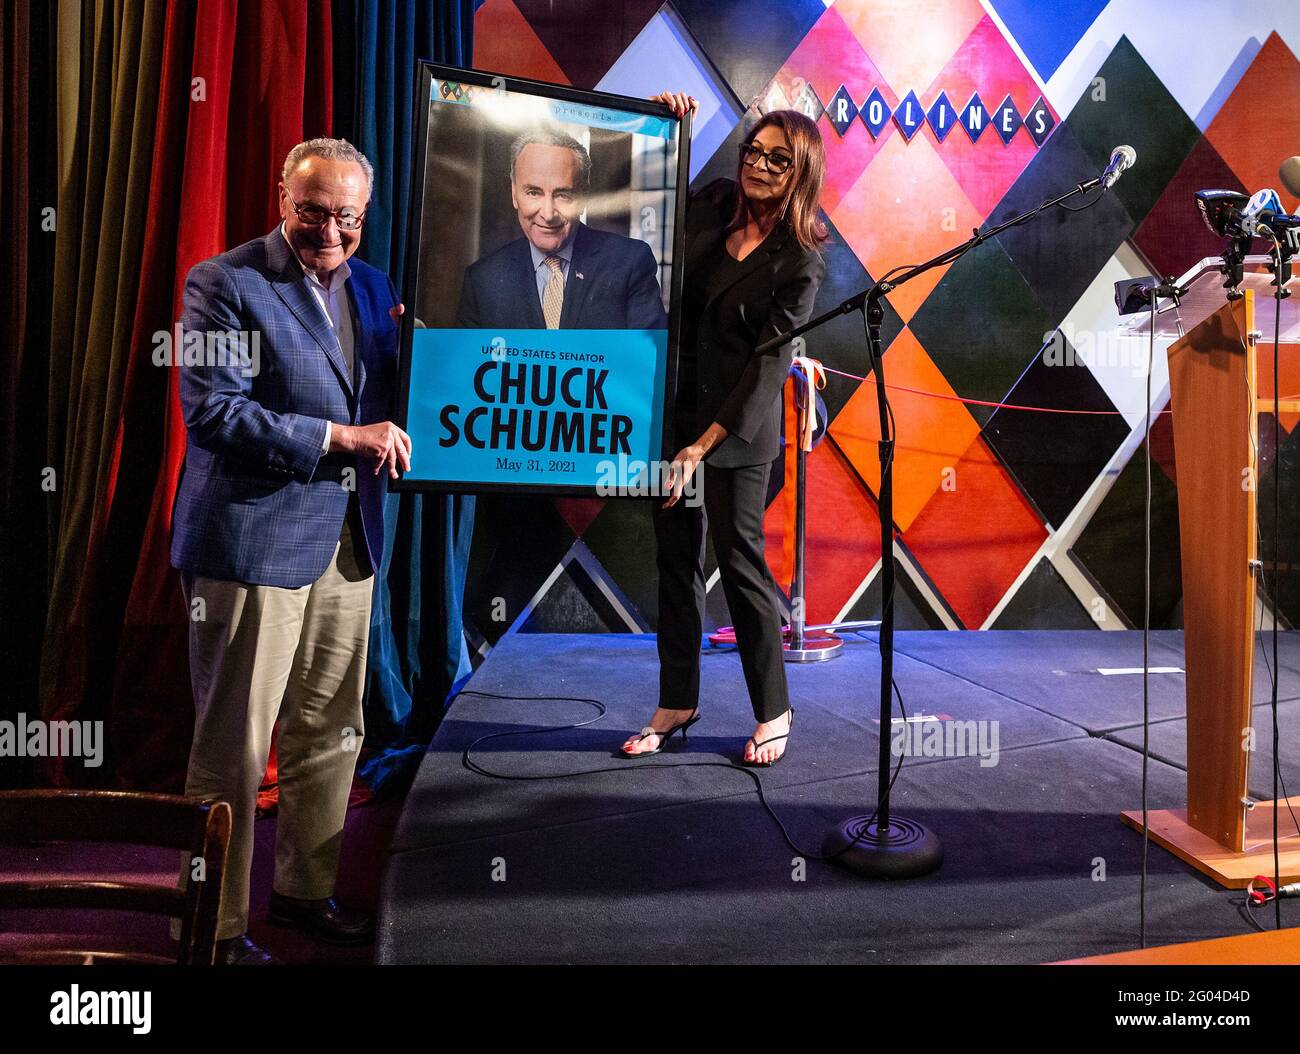 New York, United States. 31st May, 2021. Caroline Hirsch presents U. S. Senator Charles Schumer with poster at Carolines on Broadway comedy club re-opening after pandemic ceremony. Senator Charles Schumer lauded Safe our Stages (SOS) bill passed by Senate to help cultural venues to survive pandemic. He also cracked few jokes saying it is comedy club he does not have a choice but say them. (Photo by Lev Radin/Pacific Press) Credit: Pacific Press Media Production Corp./Alamy Live News Stock Photo